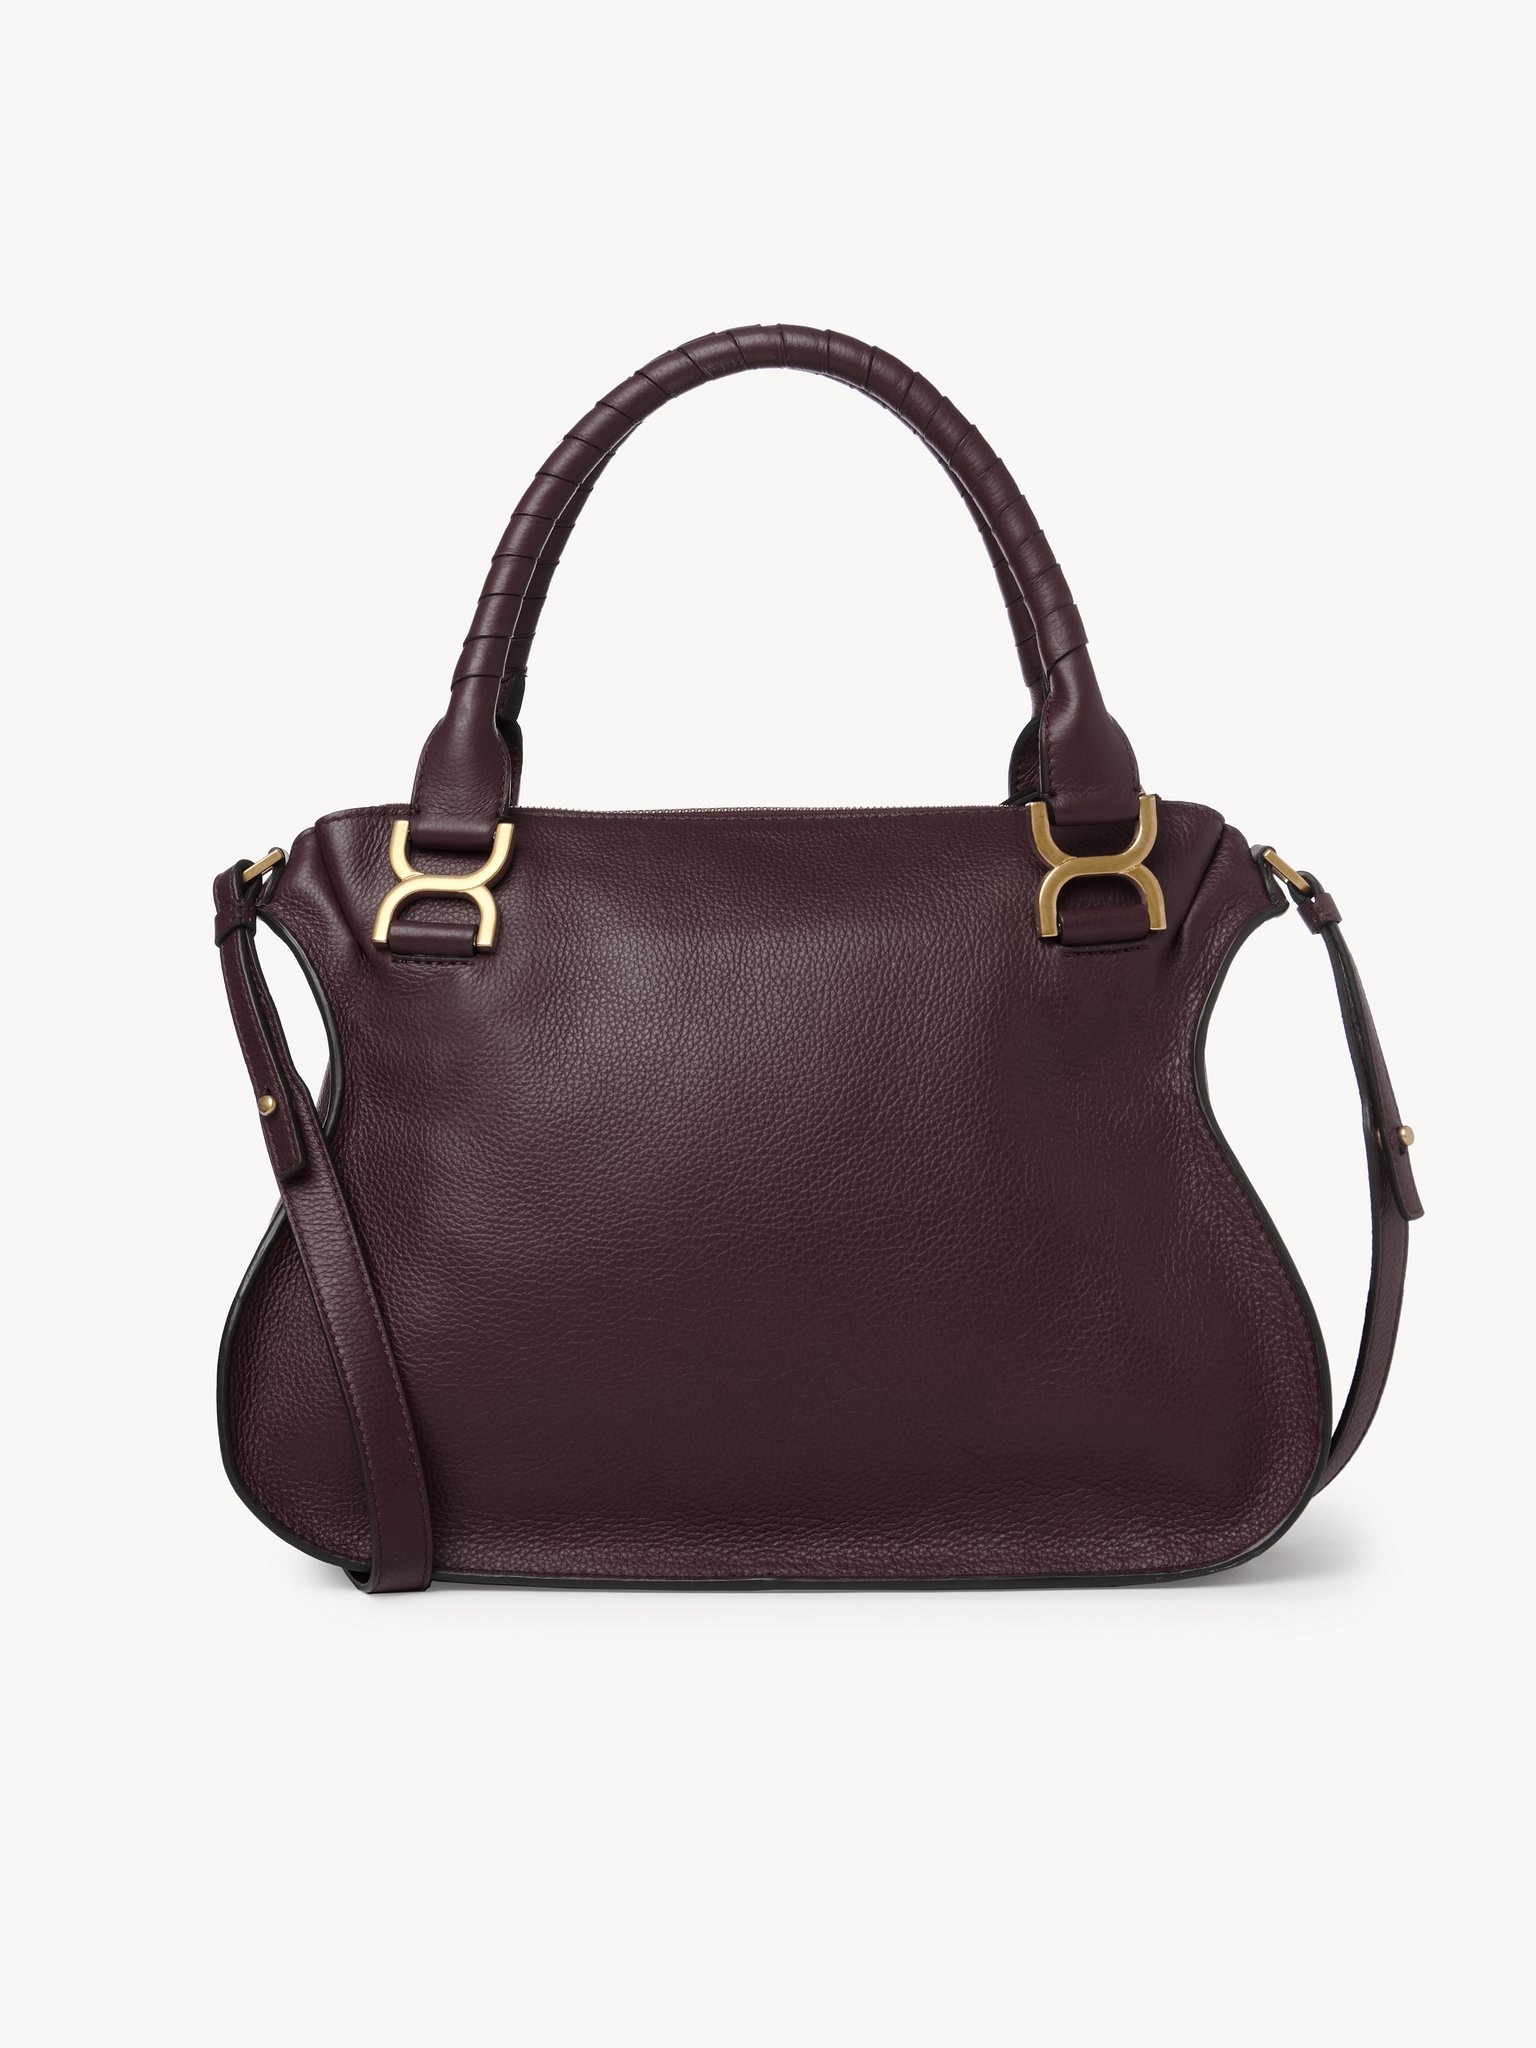 MARCIE BAG IN GRAINED LEATHER - 2